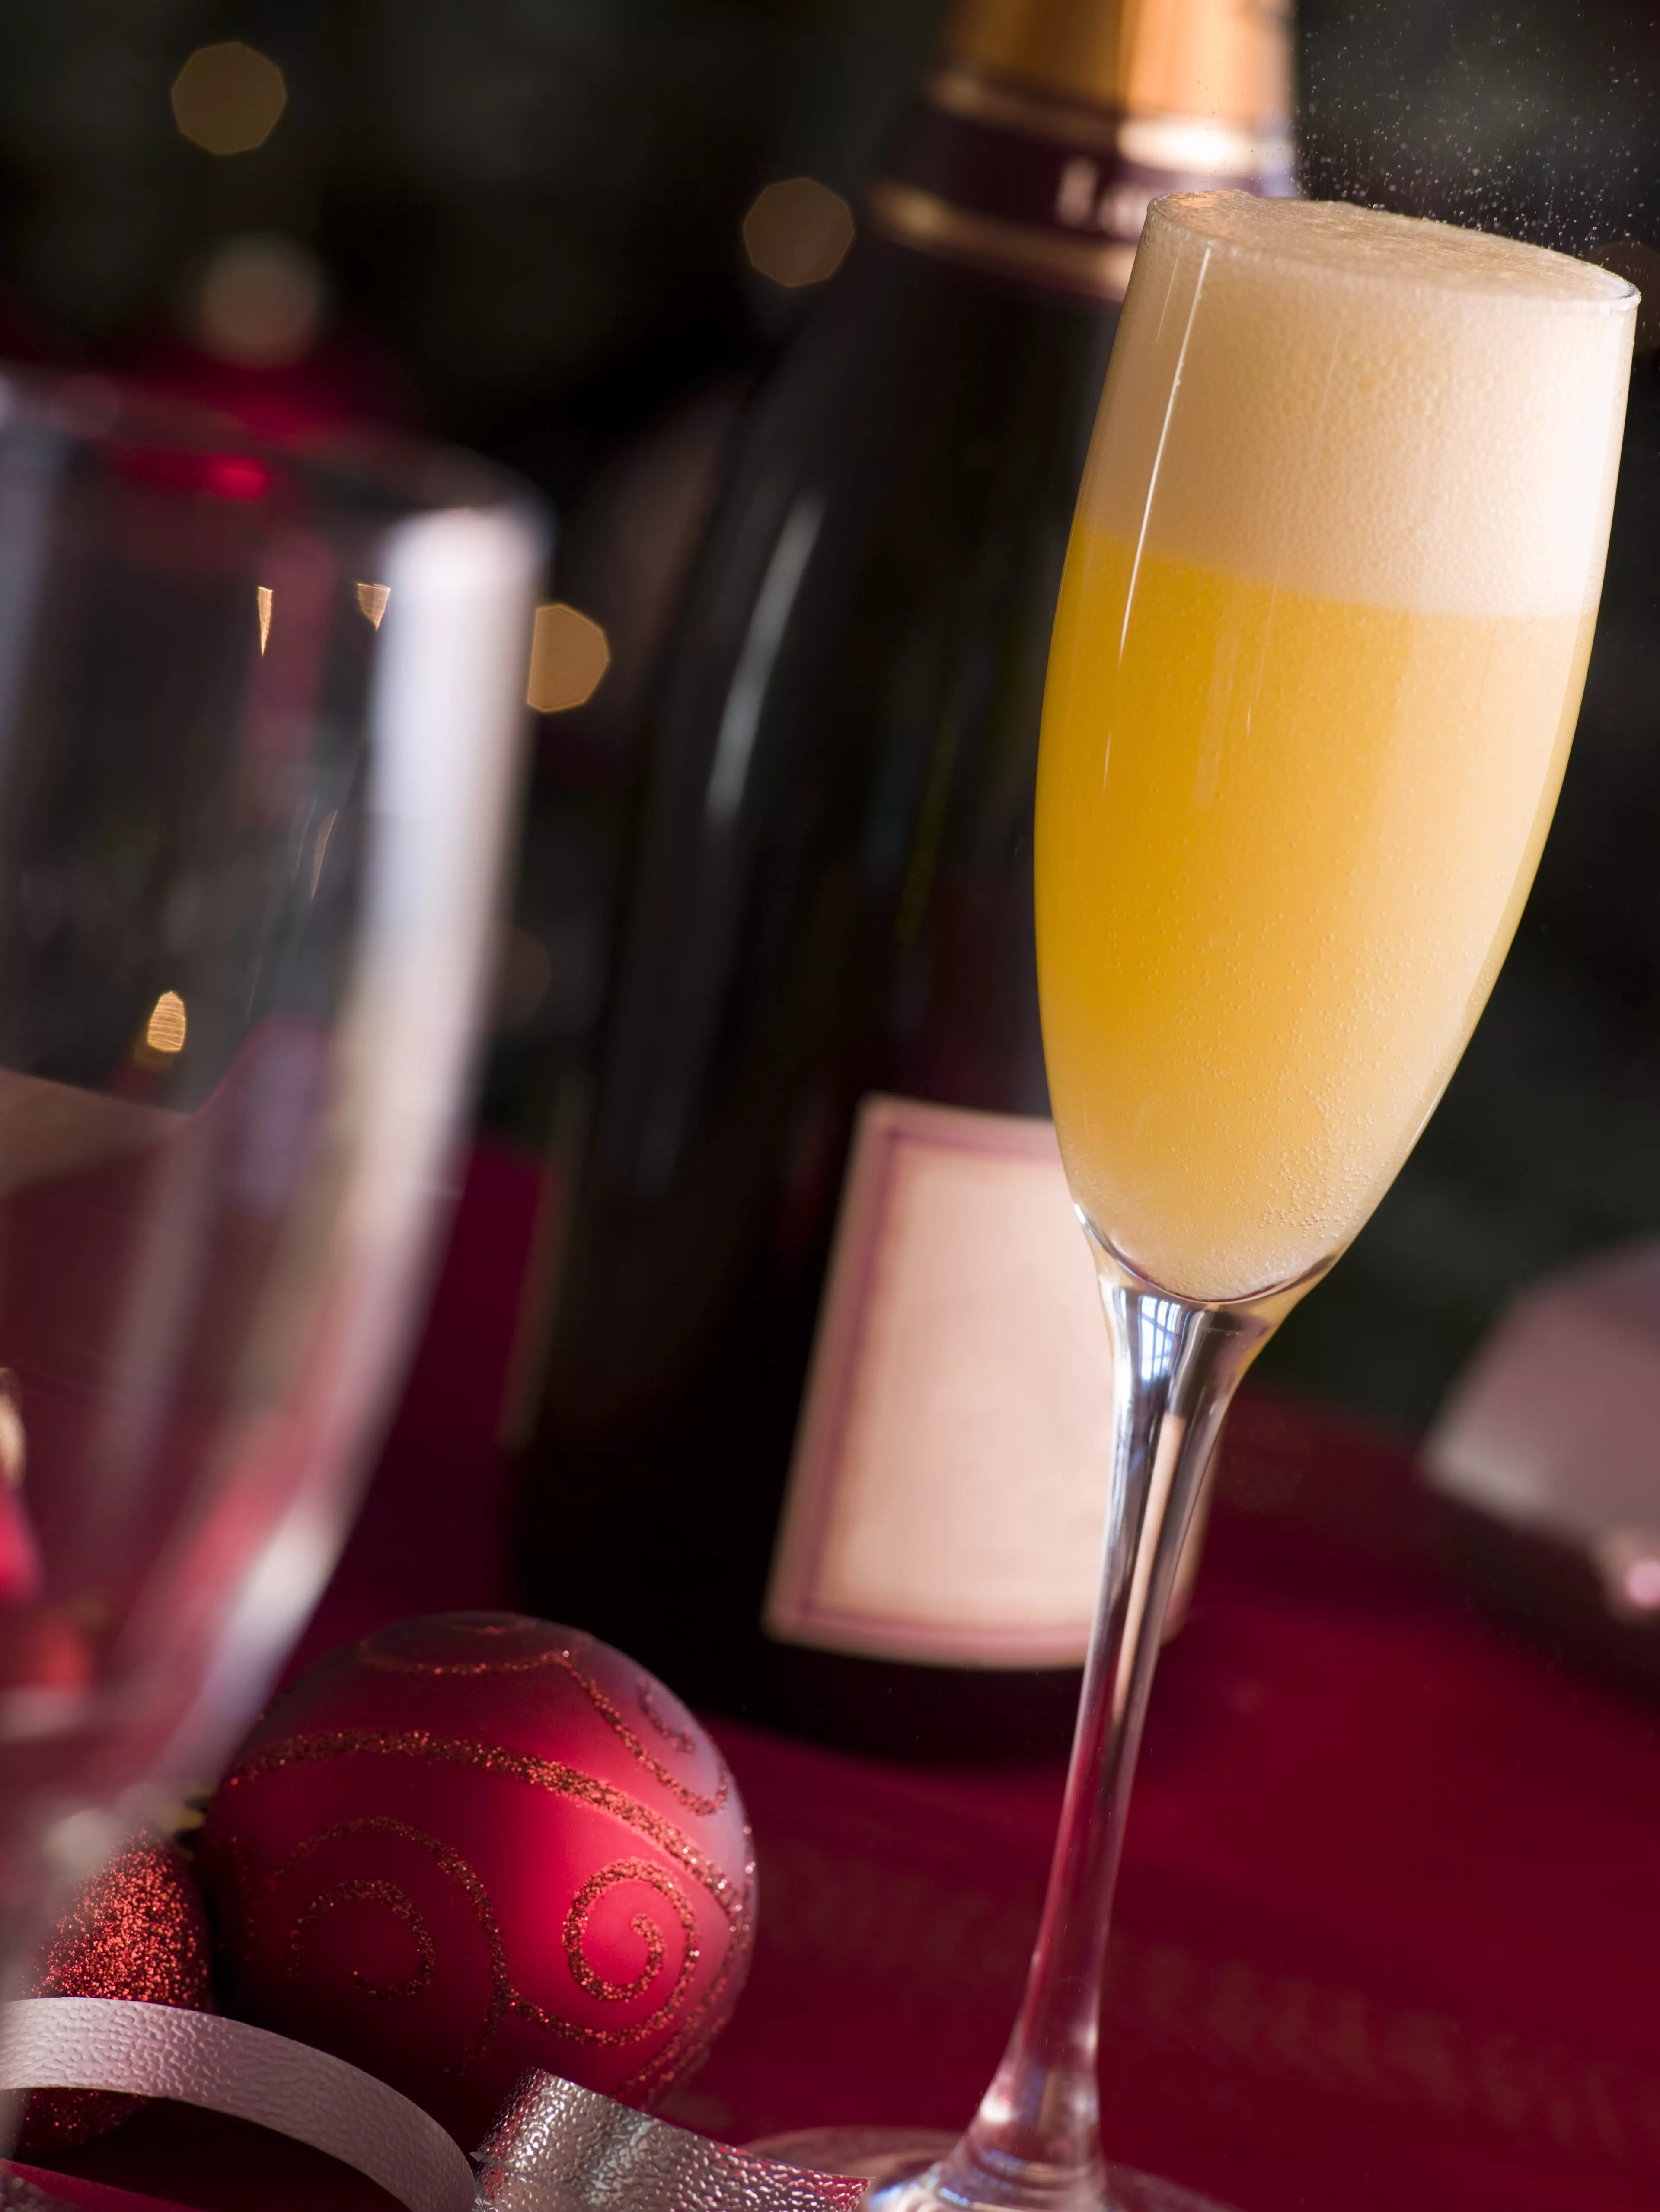 There's a reason behind why your drunkness feels different with buck's fizz (